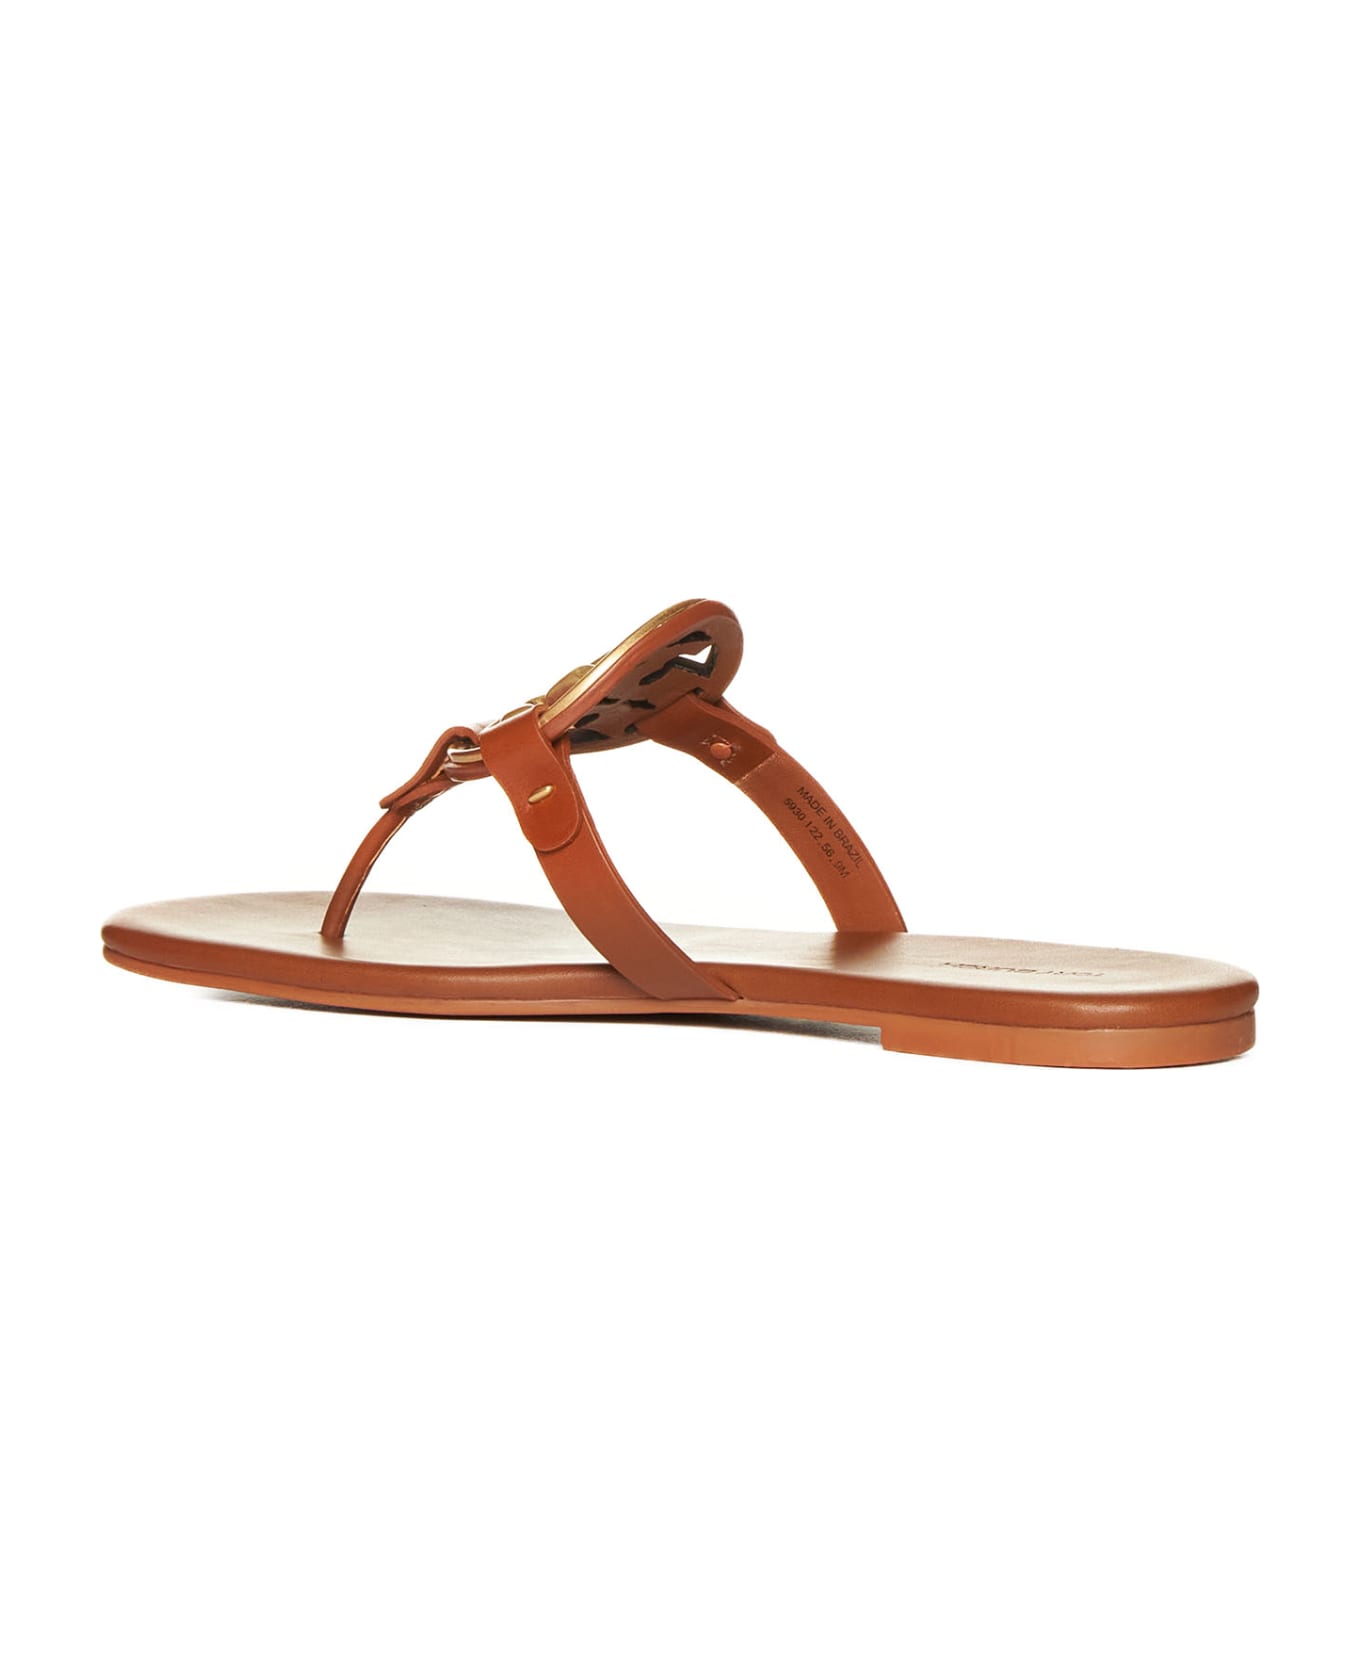 Tory Burch Flip Flop Sandals With Logo - Brown